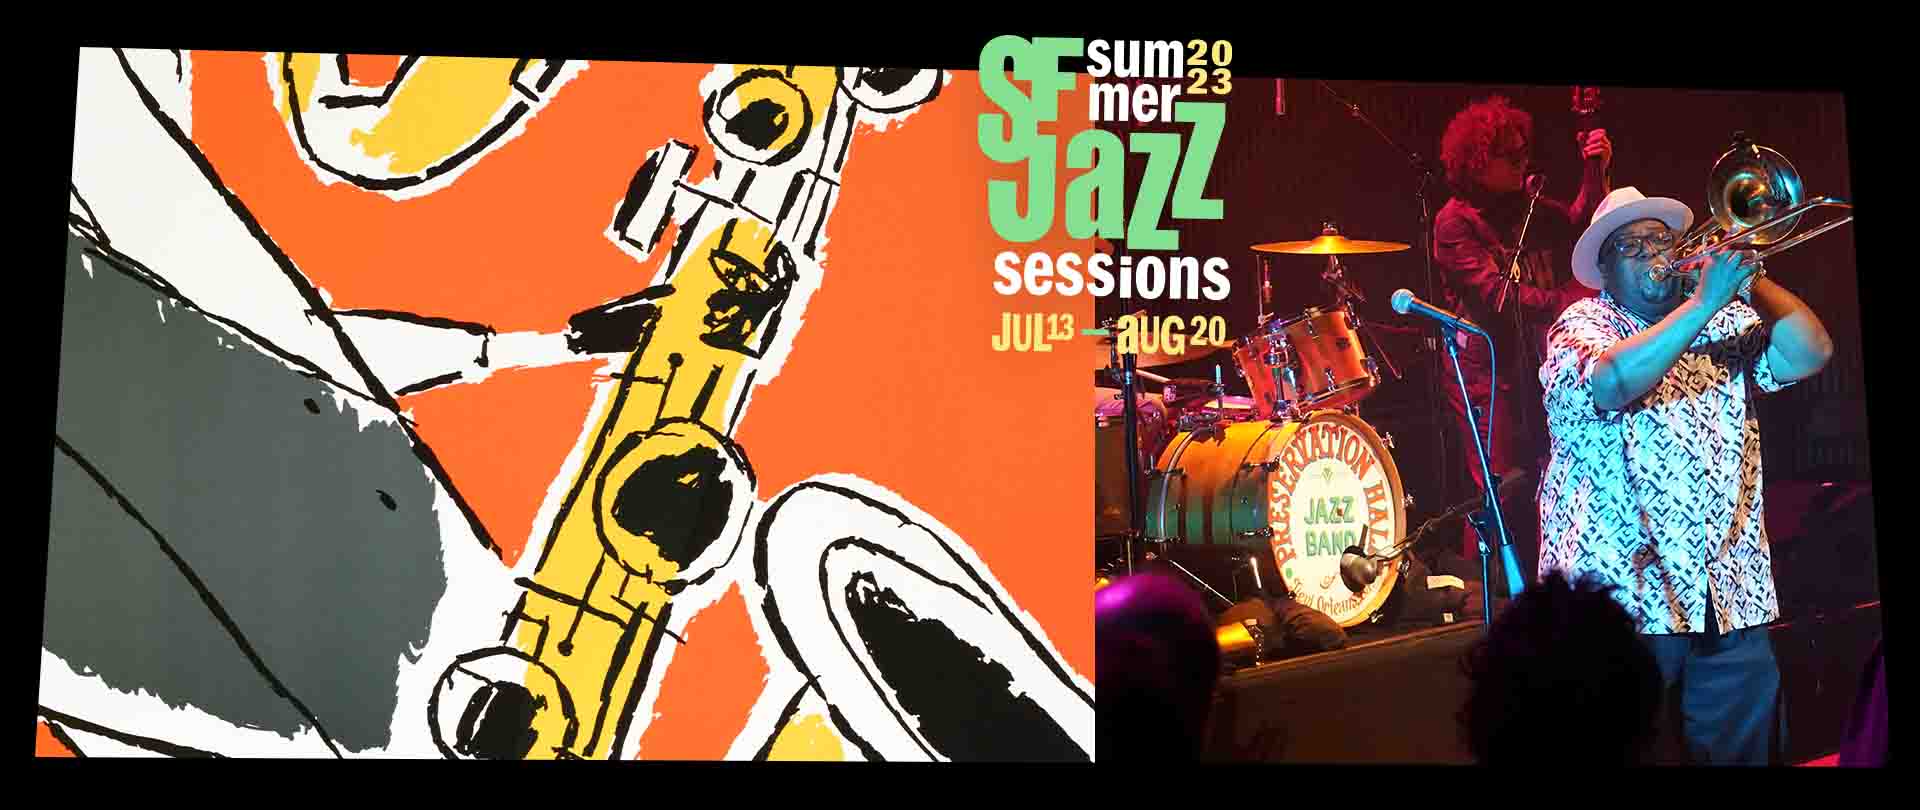 Preservation Hall Jazz Band live on stage at SFJAZZ, with the 2023 Summer Sessions artwork